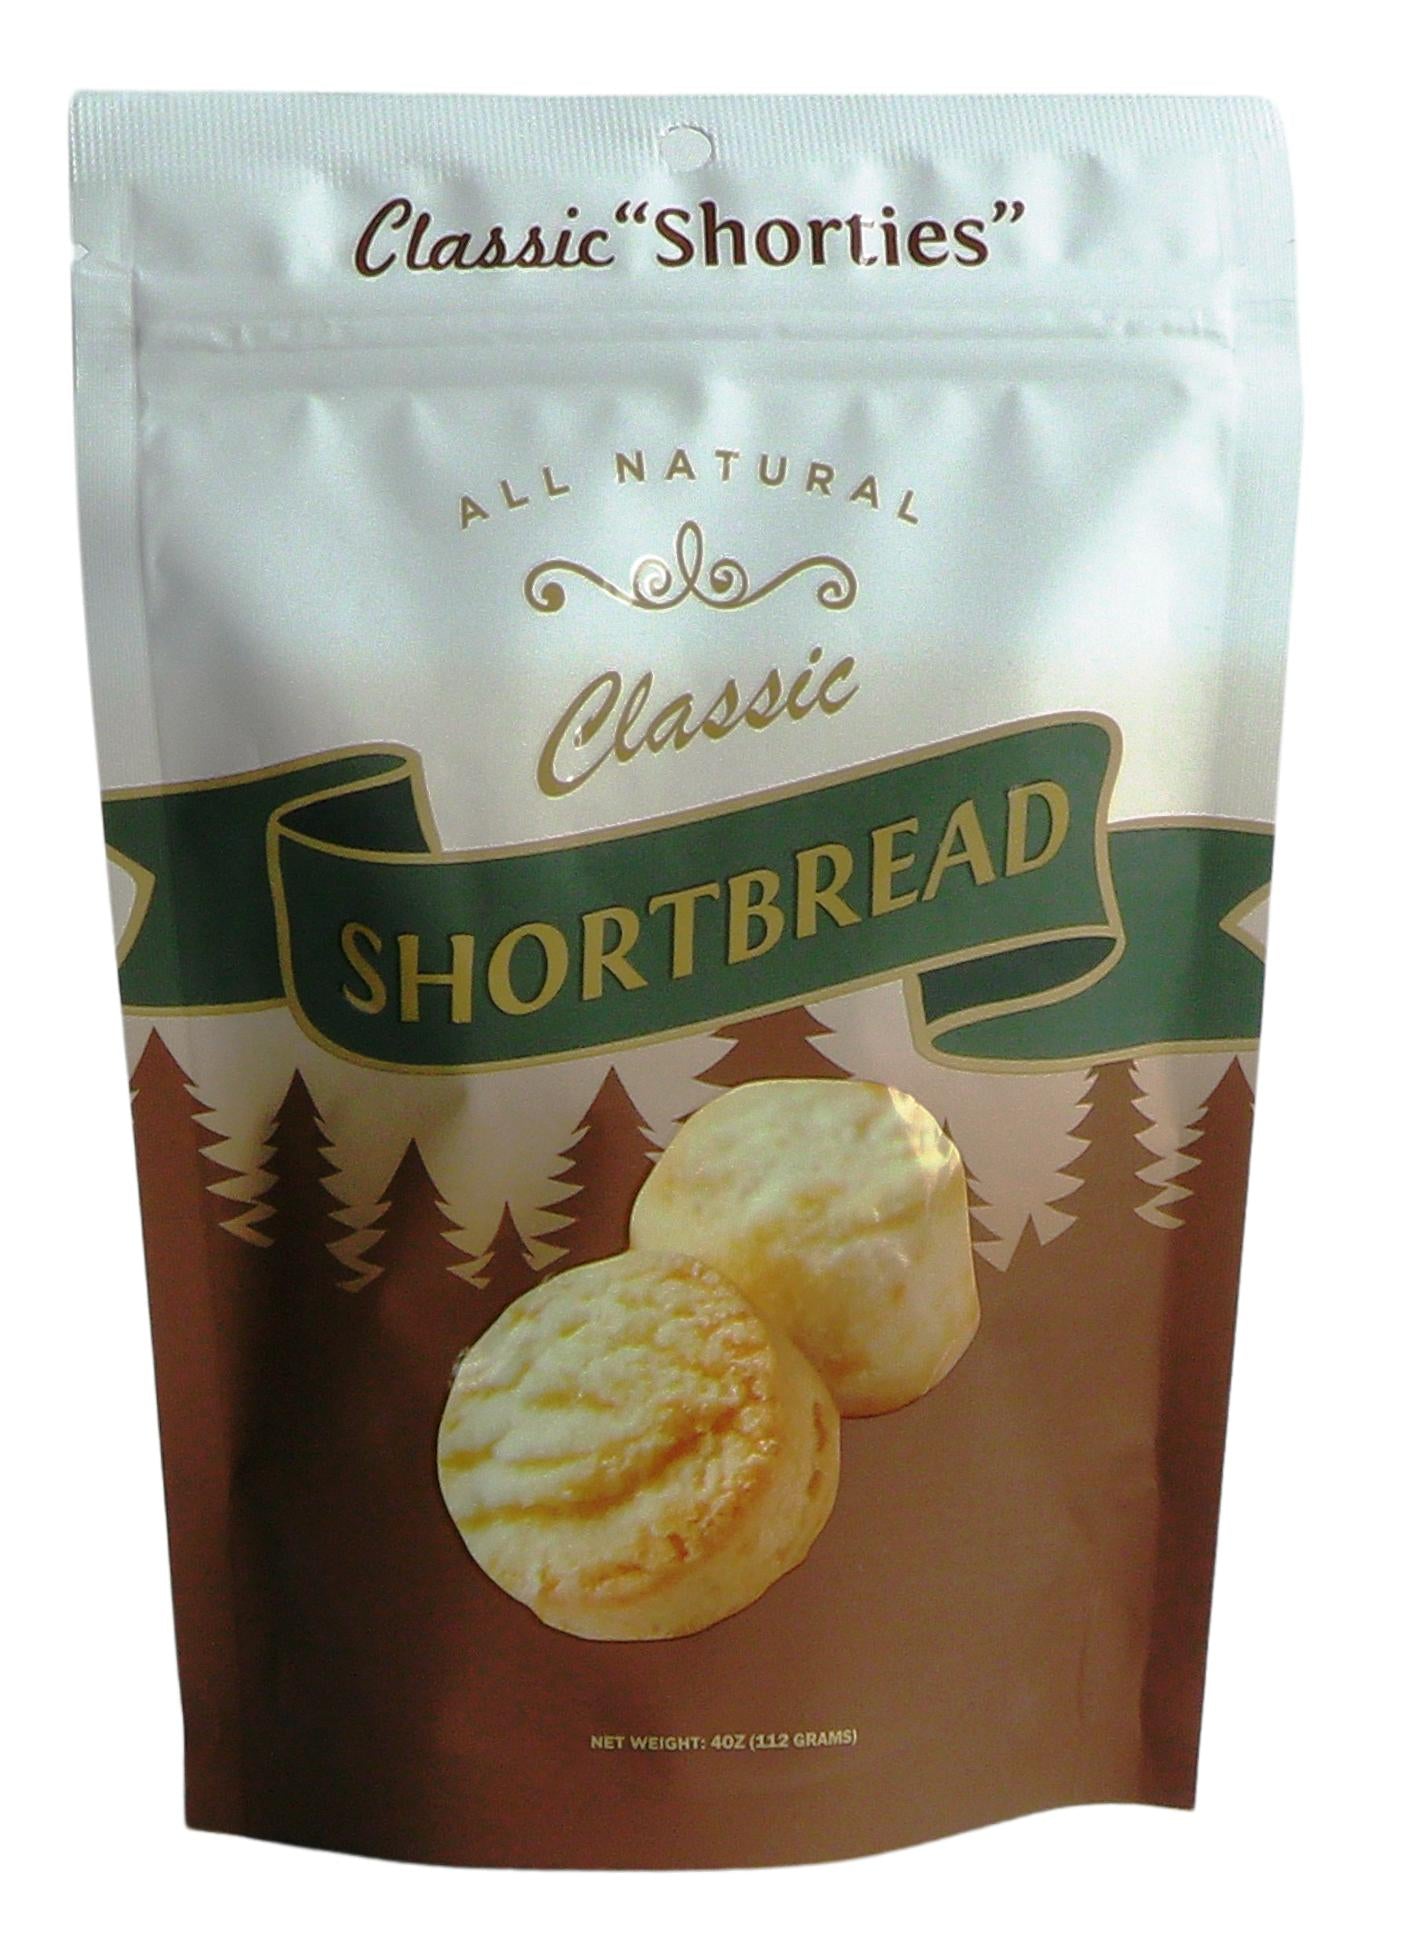 4 ounce pouch of classic shortbread cookies